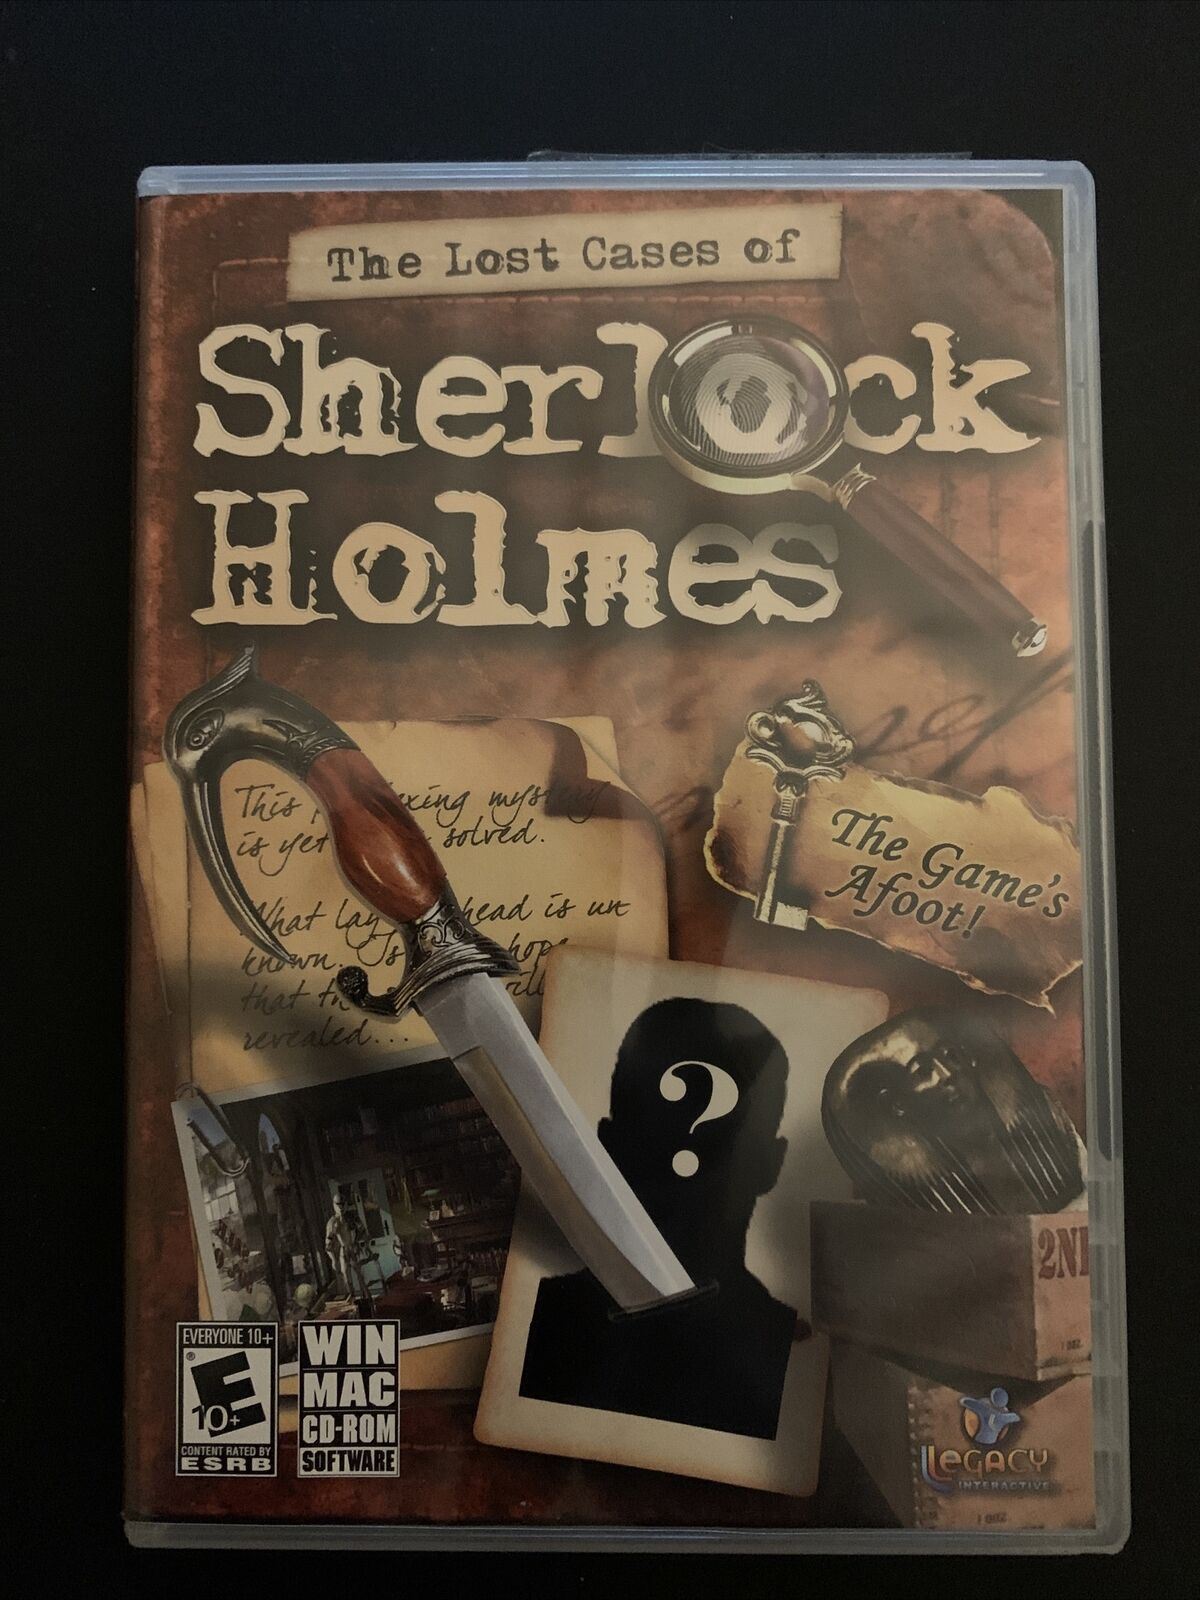 The Lost Cases Of Sherlock Holmes - PC Windows MAC Hidden Object Game